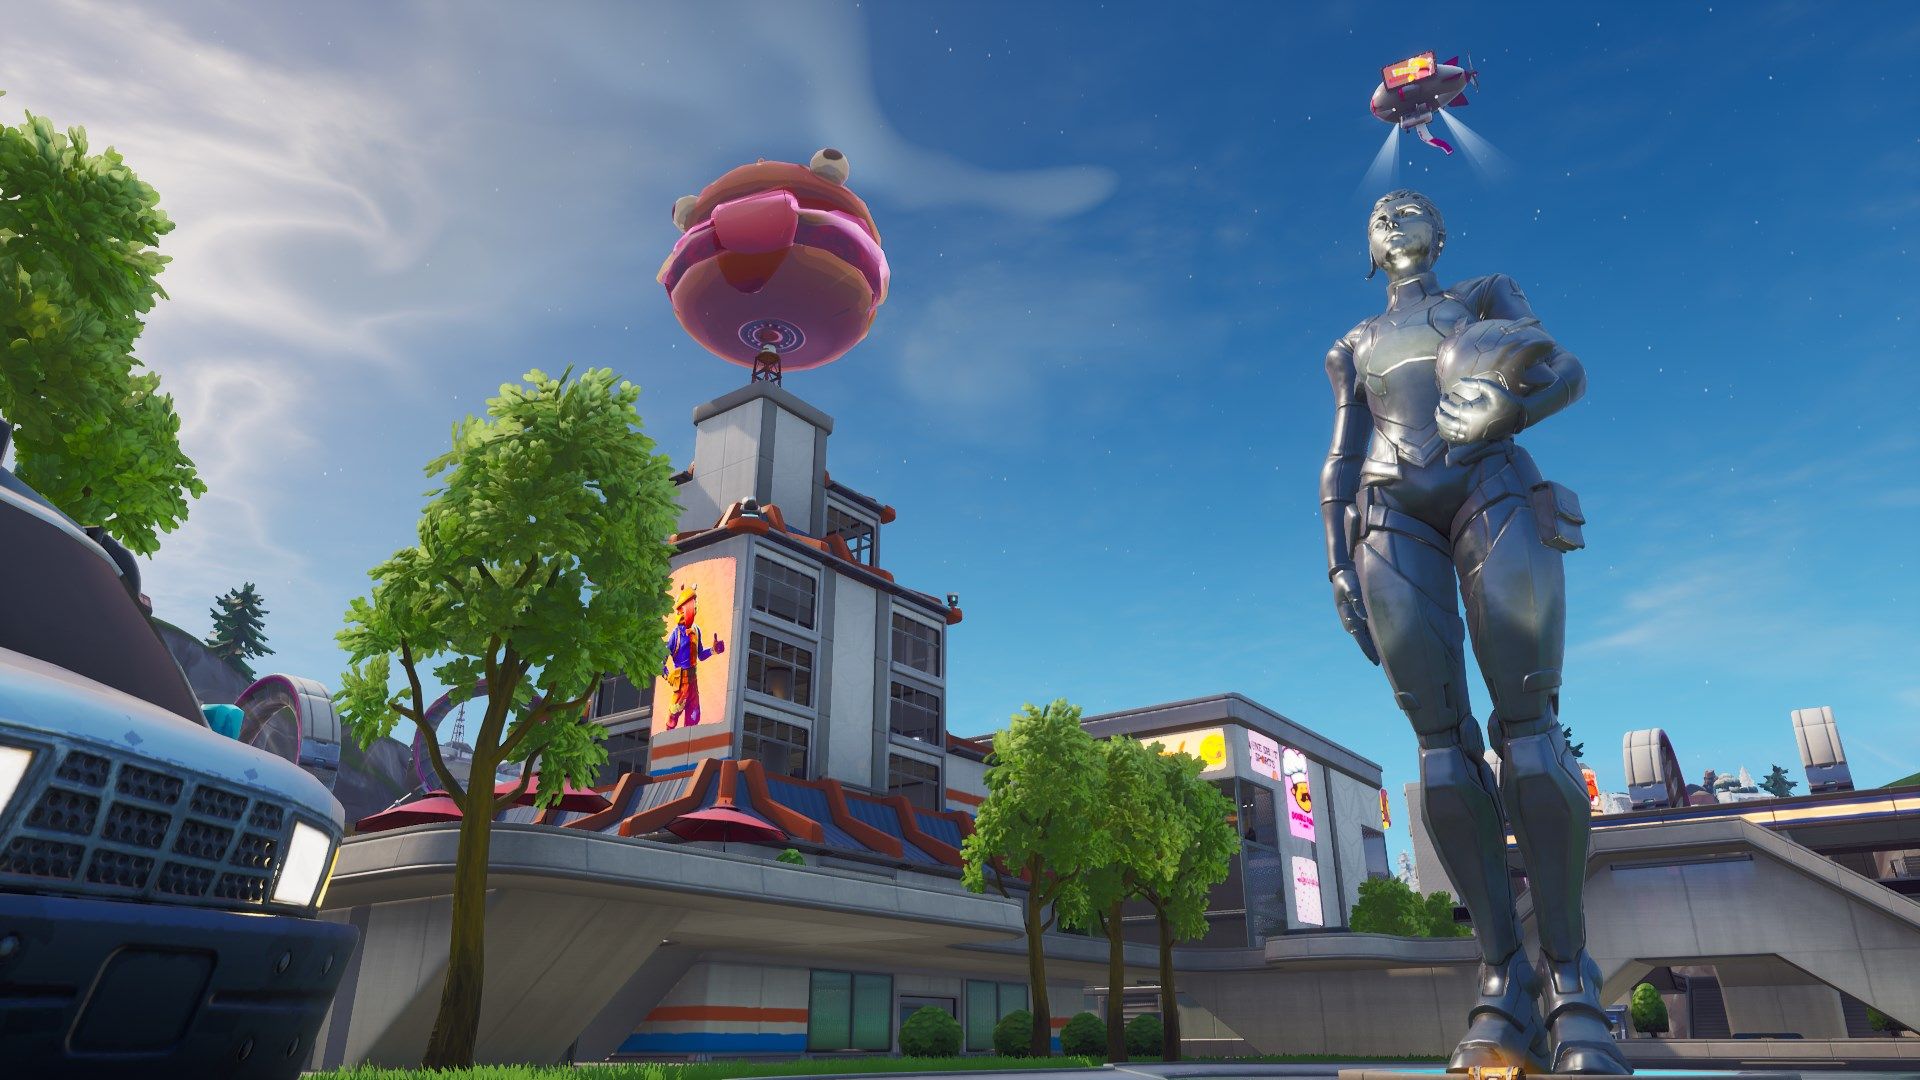 Season 9 Map Changes - Neo Tilted, Mega Mall, Pressure Plant, and More